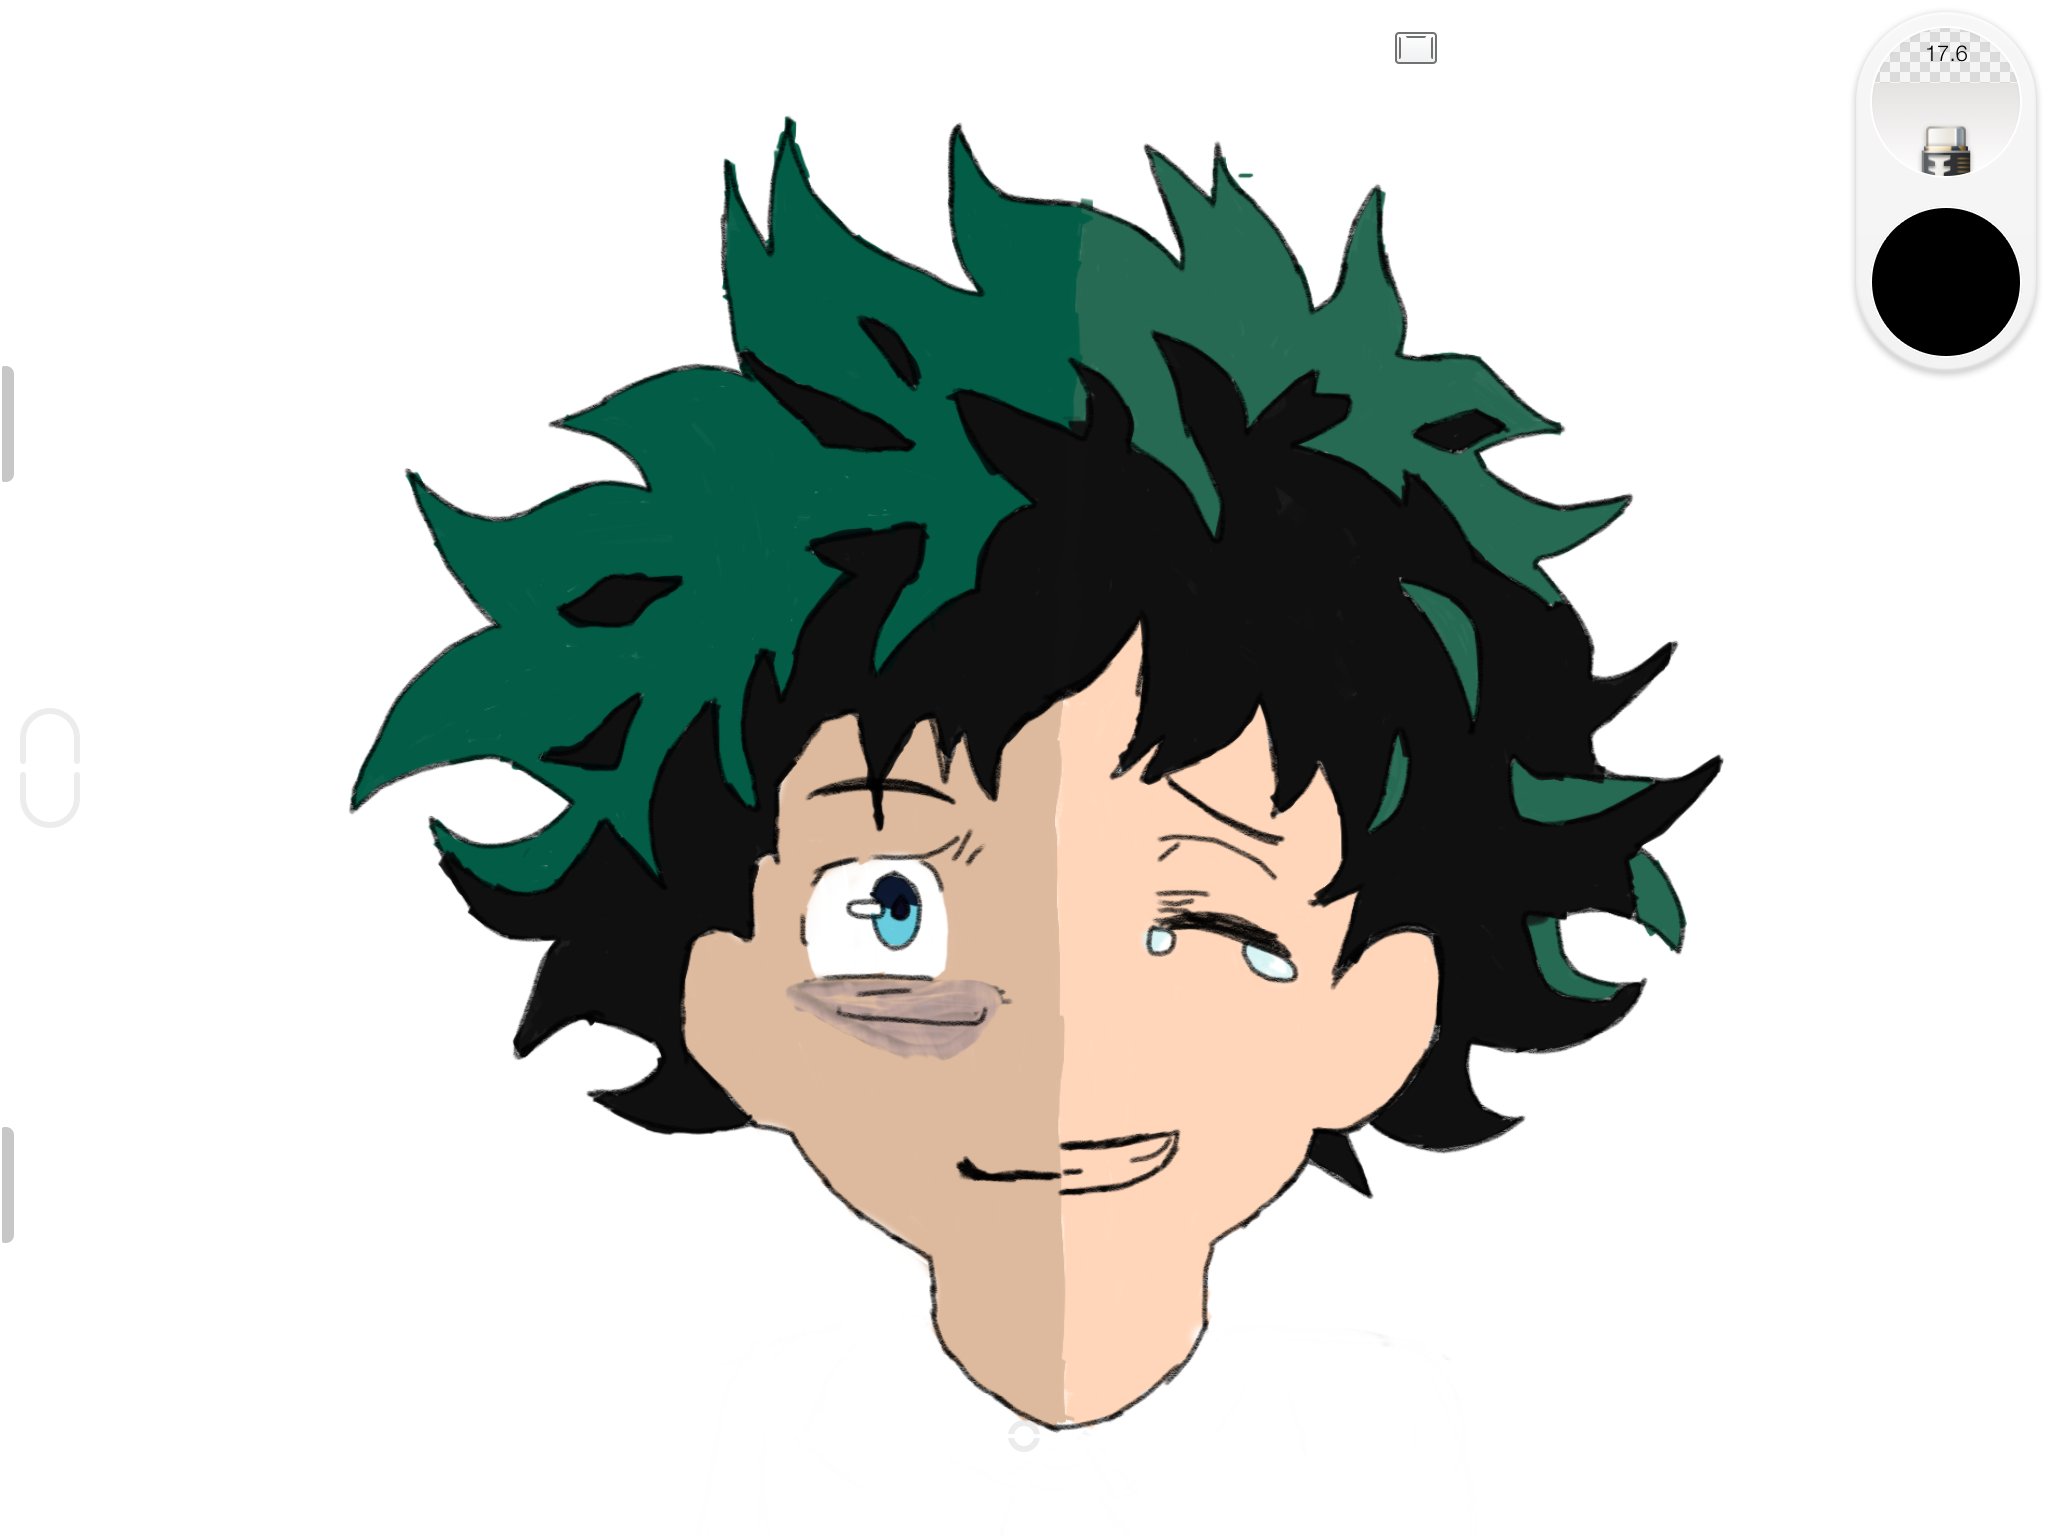 Recently hacked just gotta say go the hell away b kk

Anyway sorry for the inconvenience the names Midoriya Izuku and I’m going to become a hero!